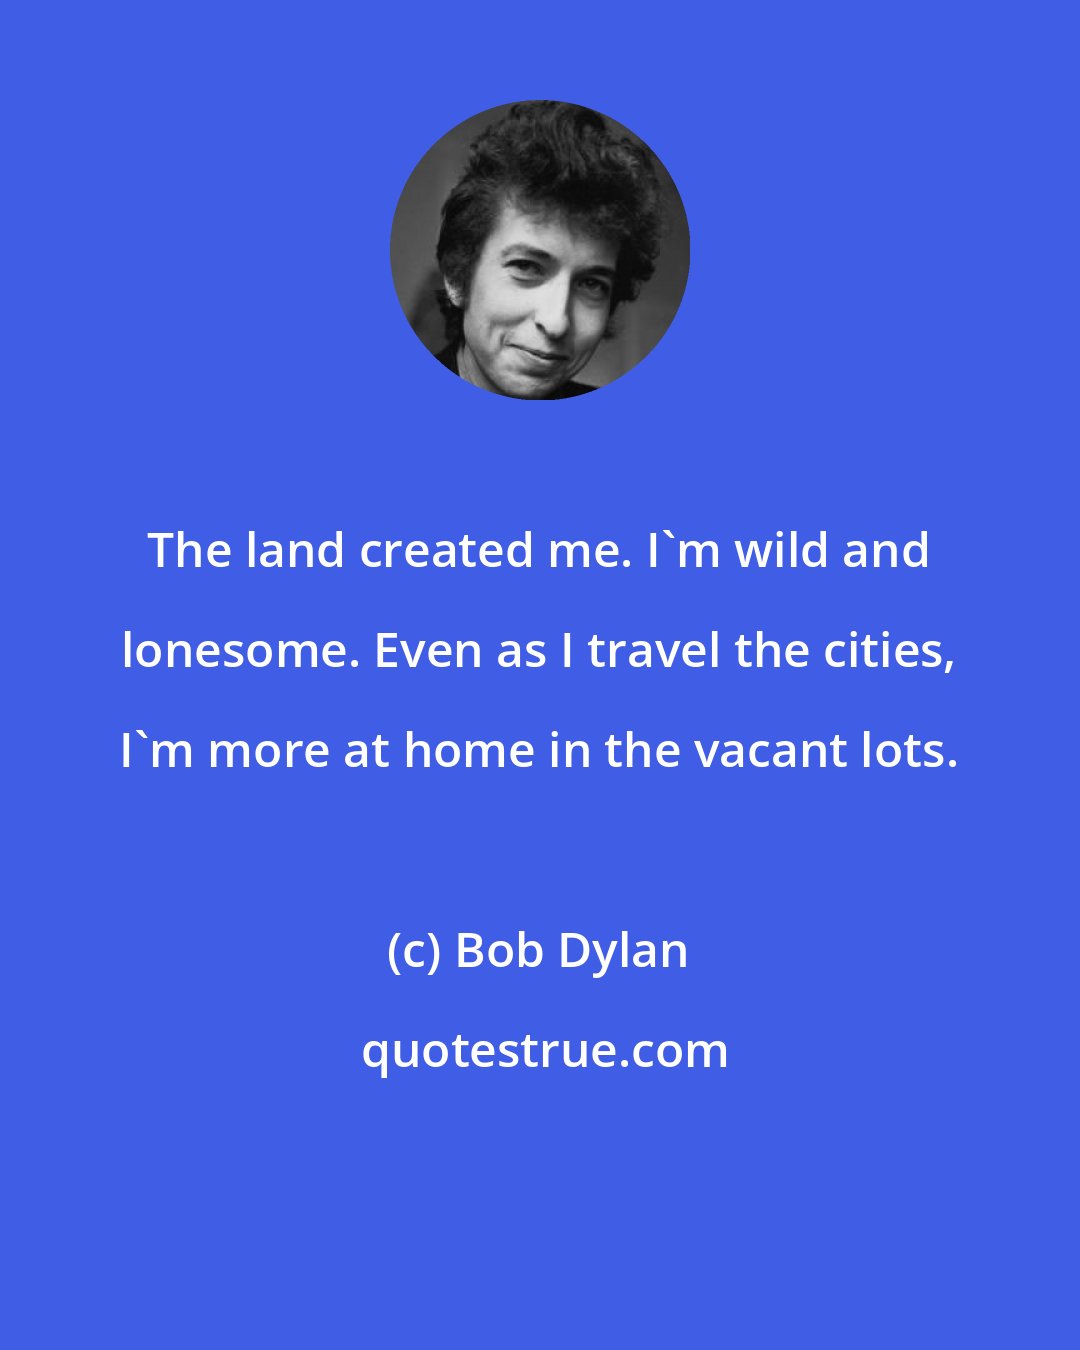 Bob Dylan: The land created me. I'm wild and lonesome. Even as I travel the cities, I'm more at home in the vacant lots.